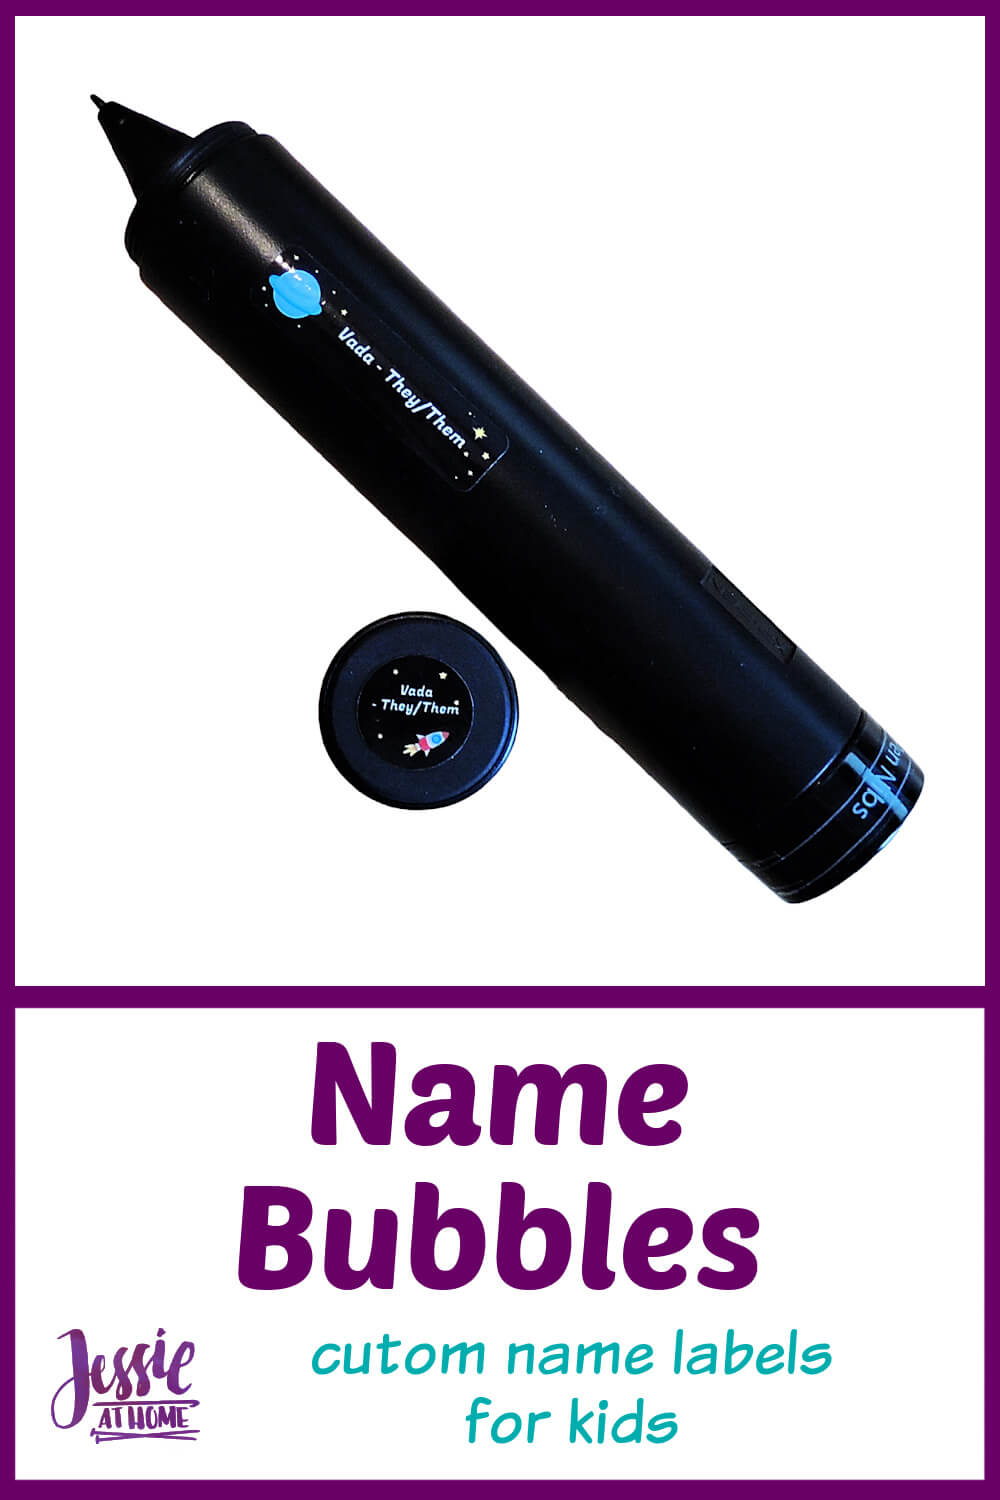 Name Bubbles - label your kids! (and their stuff)